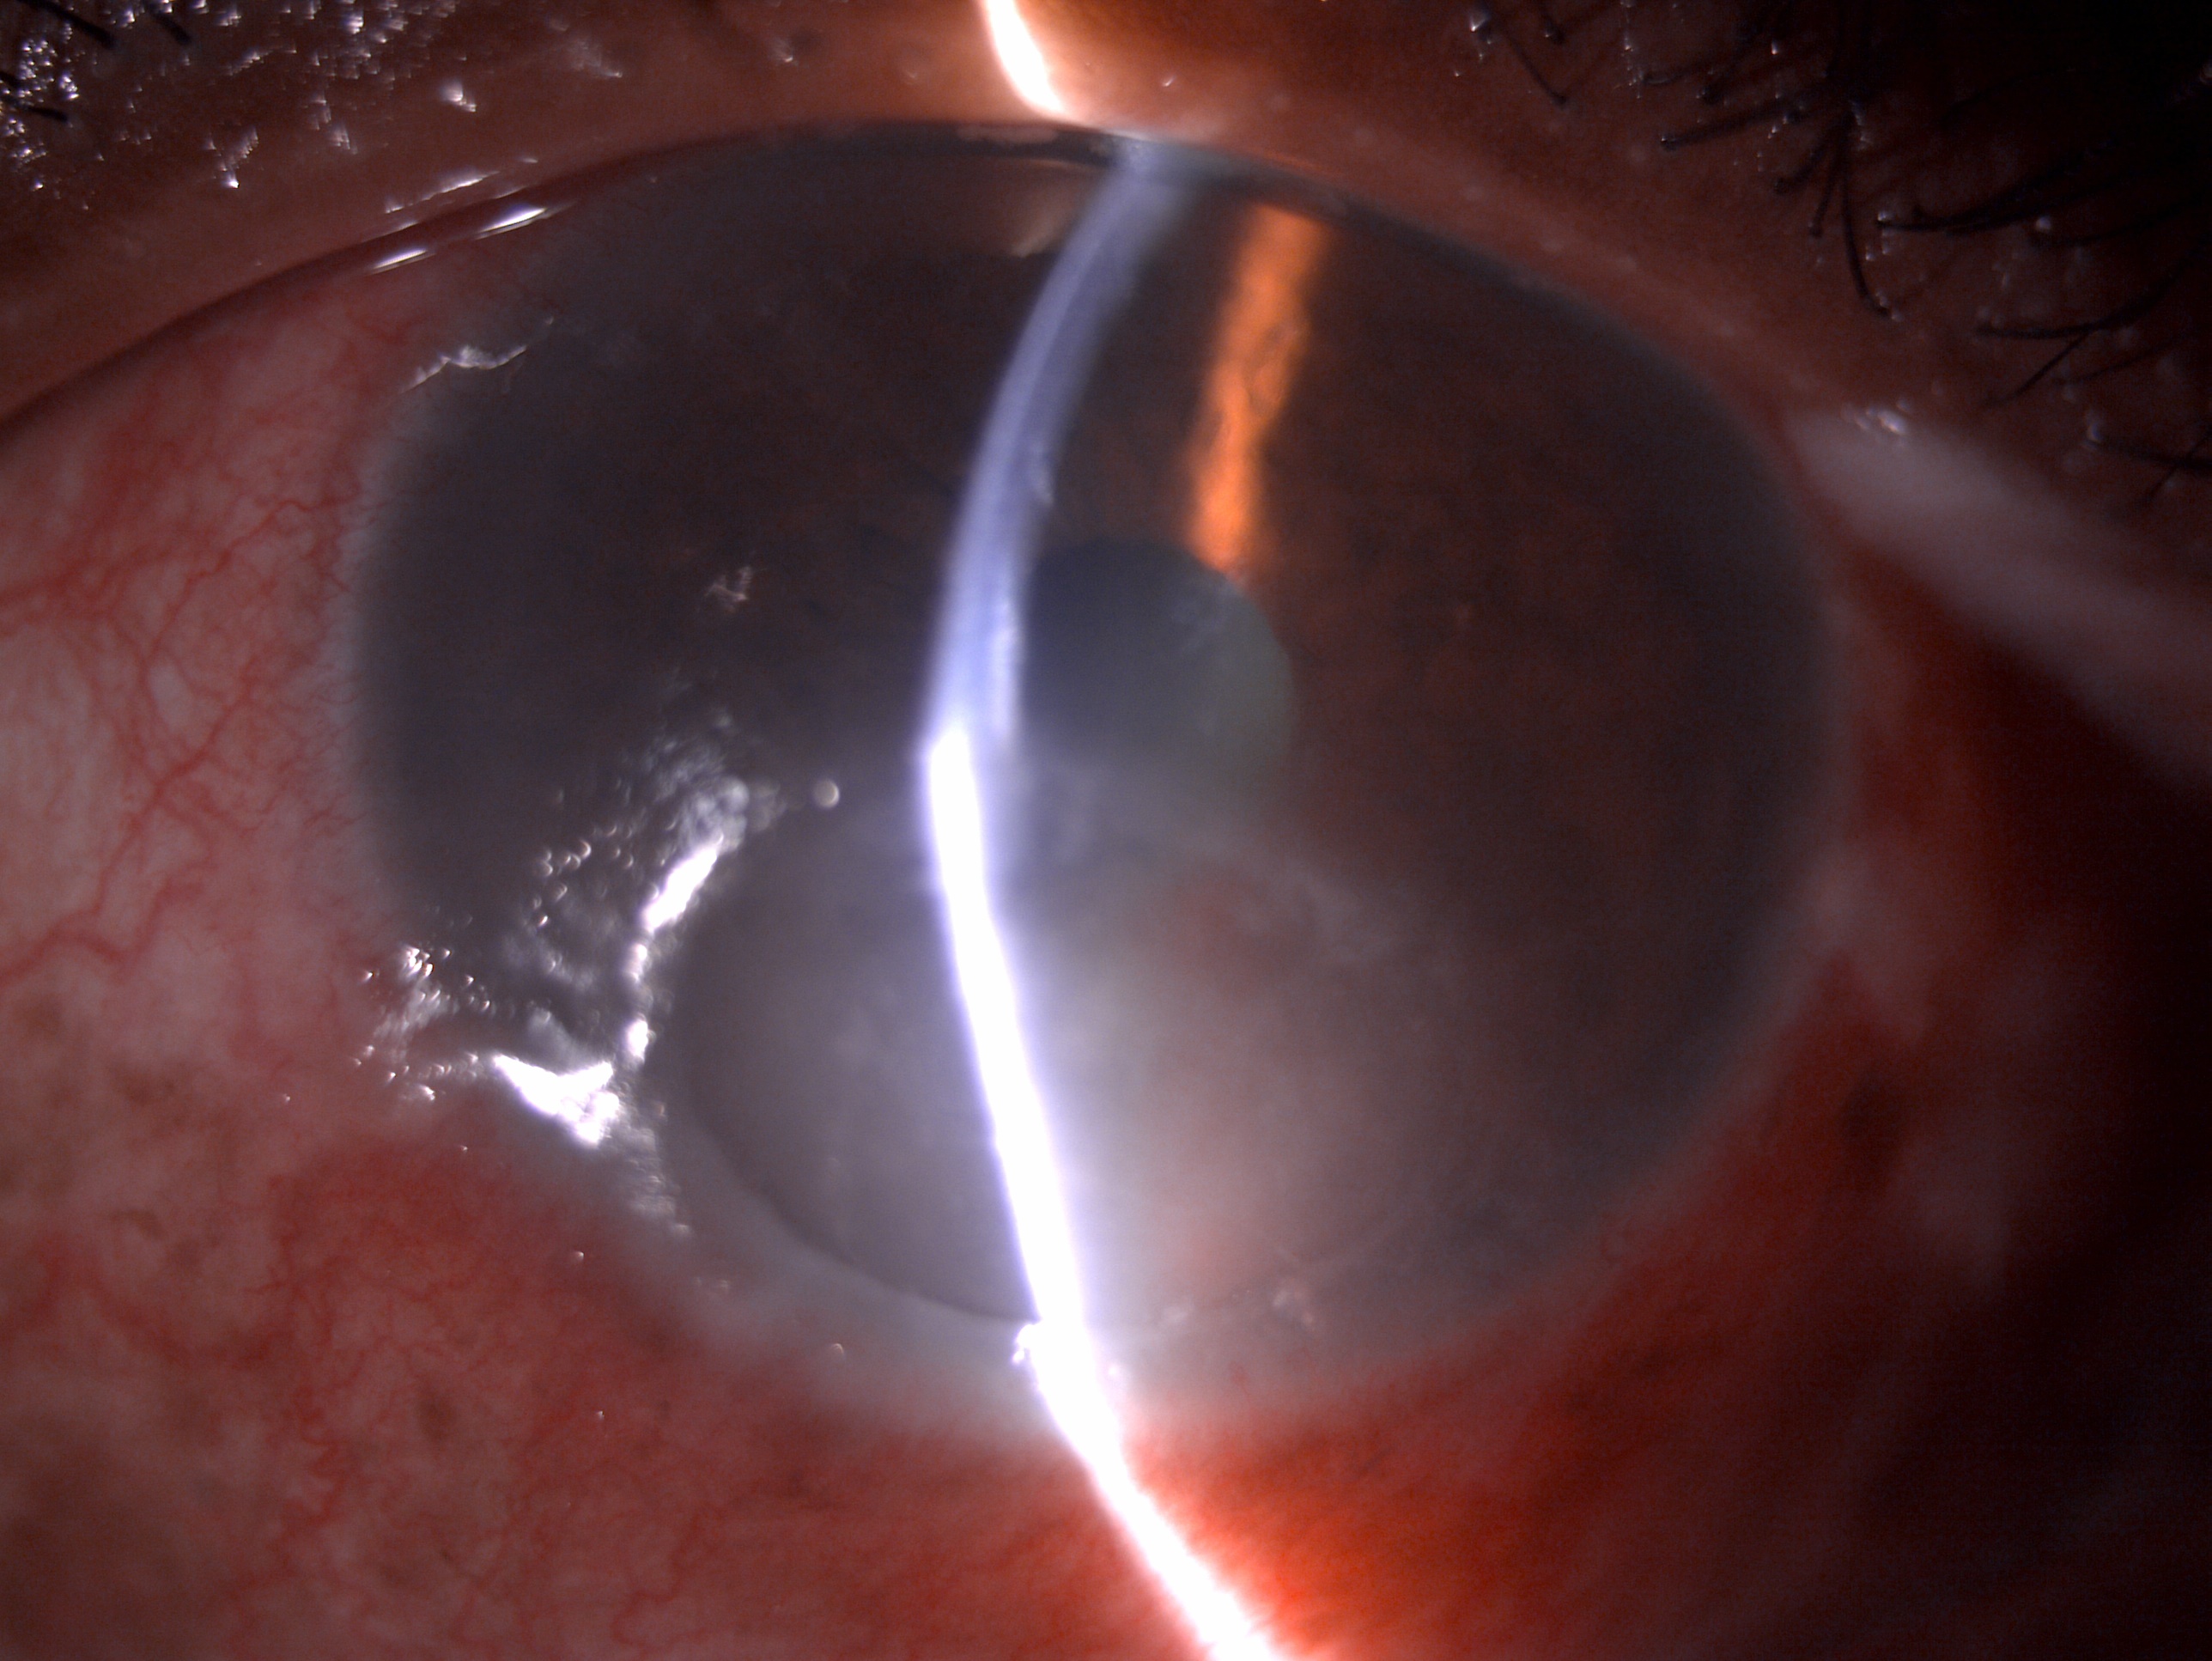 Slit lamp image depicting conjunctival congestion, 5x5 mm epithelial defect, mid stromal infiltrate with corneal thinning pos